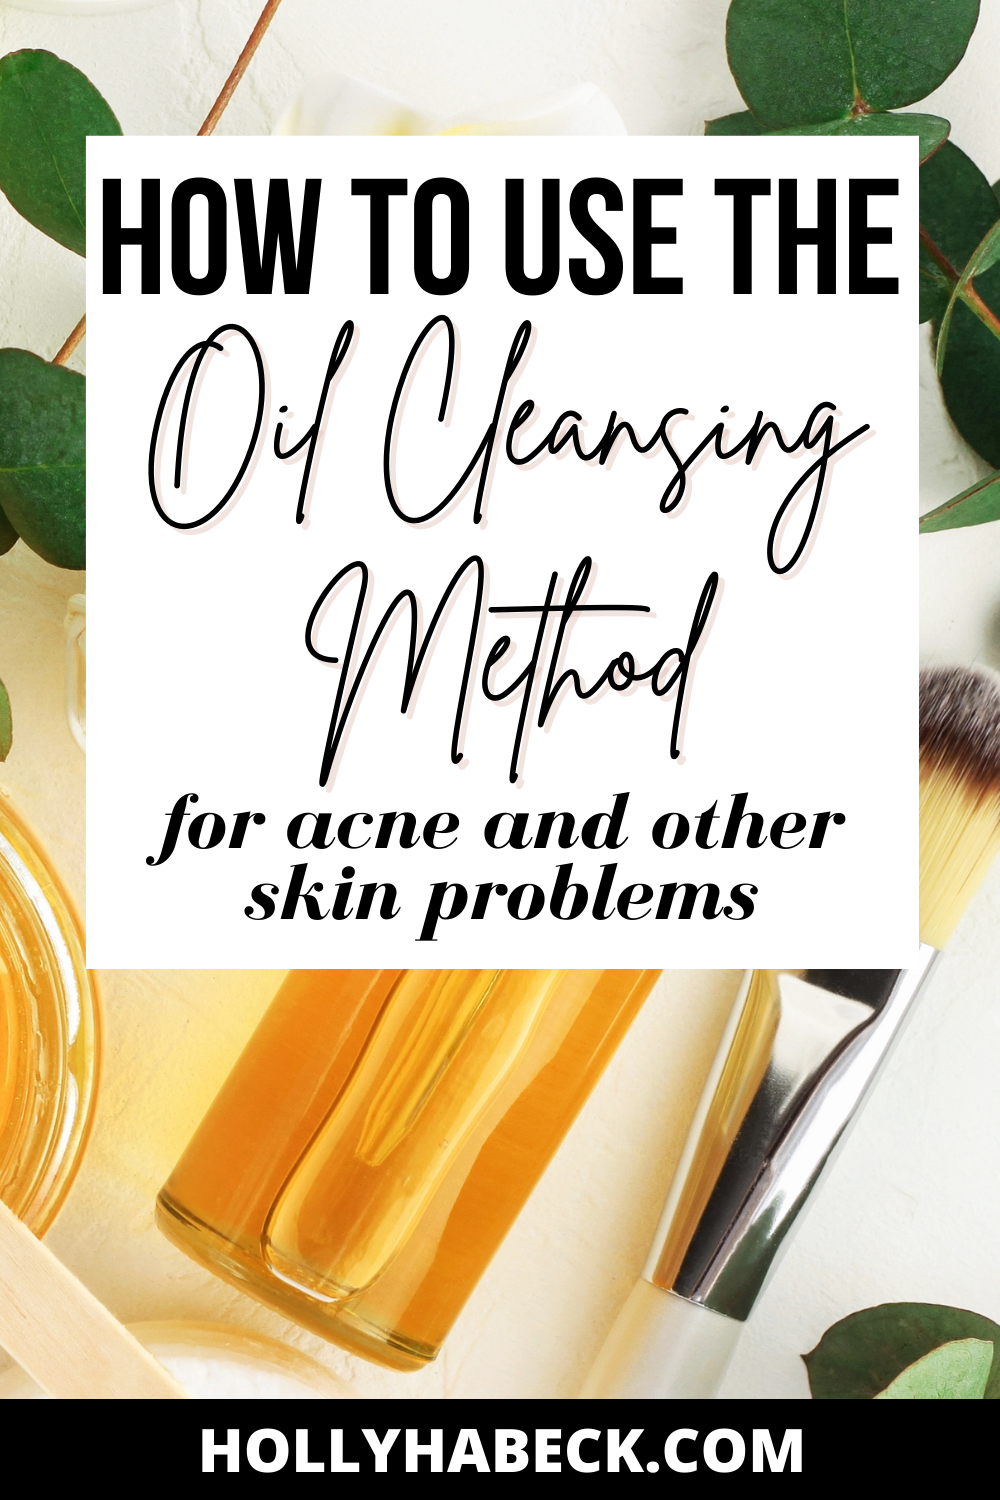 How to Oil Cleanse